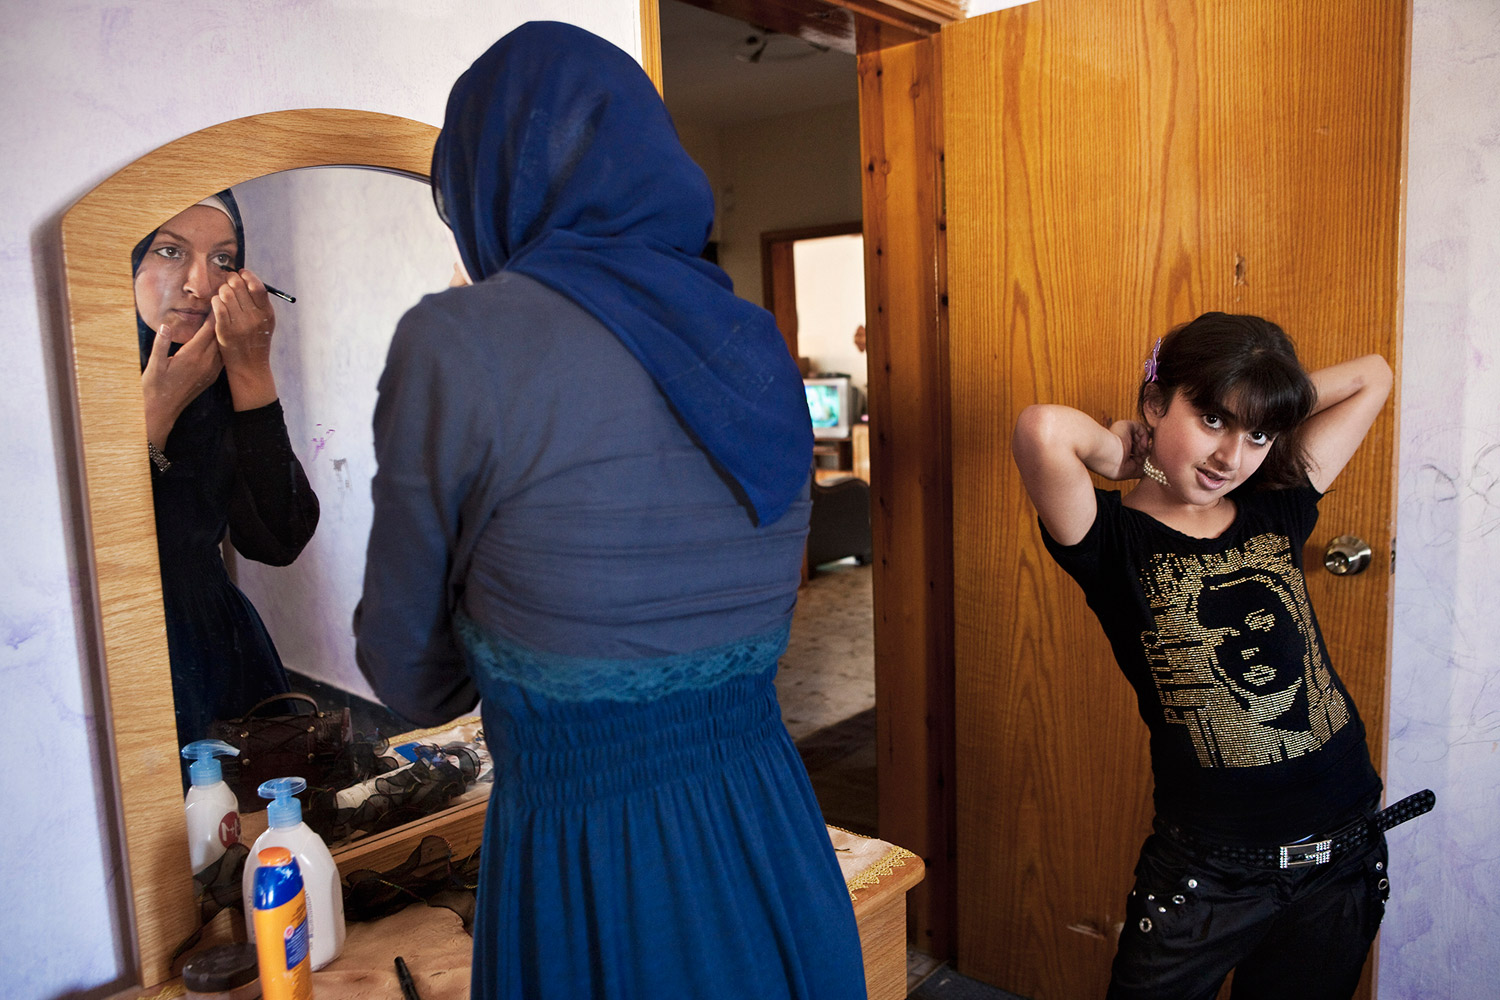 Angham Amin Essa, 18, left, puts on makeup next to her sister Johaina, 10, right, who is not yet obligated to wear a hijab (traditional Muslim head cover). Over a third of the Arab population in Israel practices a traditional Muslim lifestyle. Many young women experience discriminatory attitude from the Jewish society when wearing the hijab in public as they are required according to their religion.